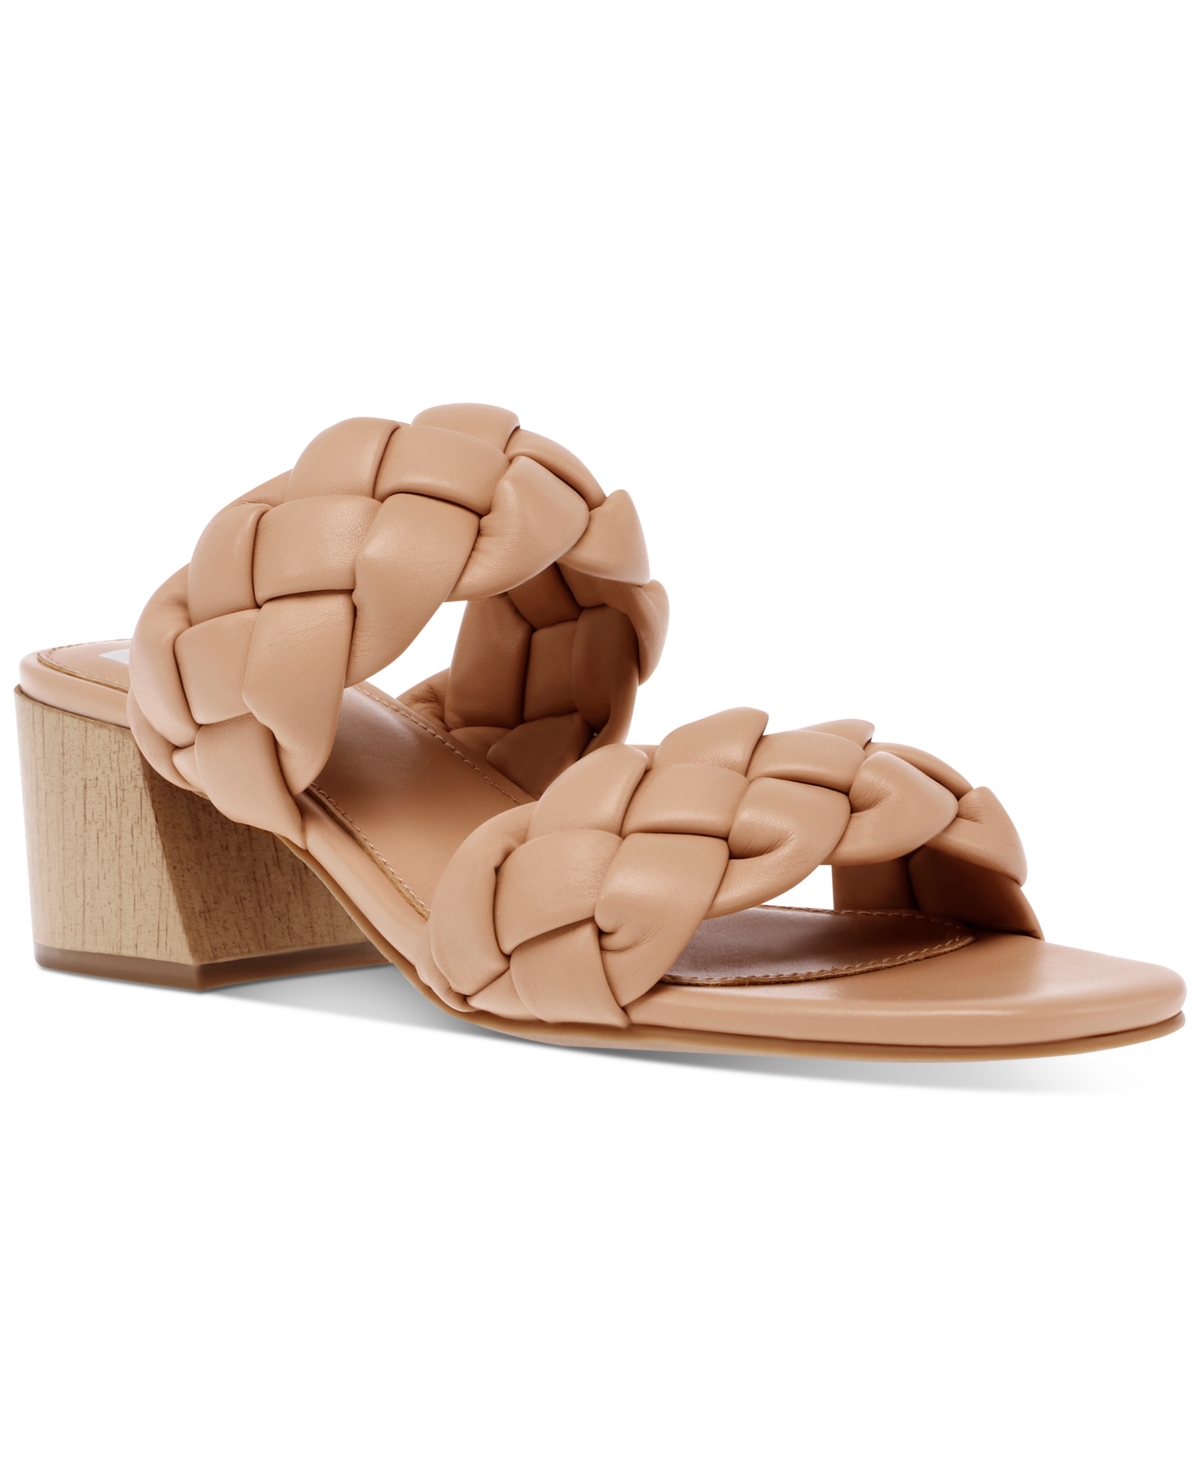 Women's Stacey Plush Braided Sandals - Natural Multi